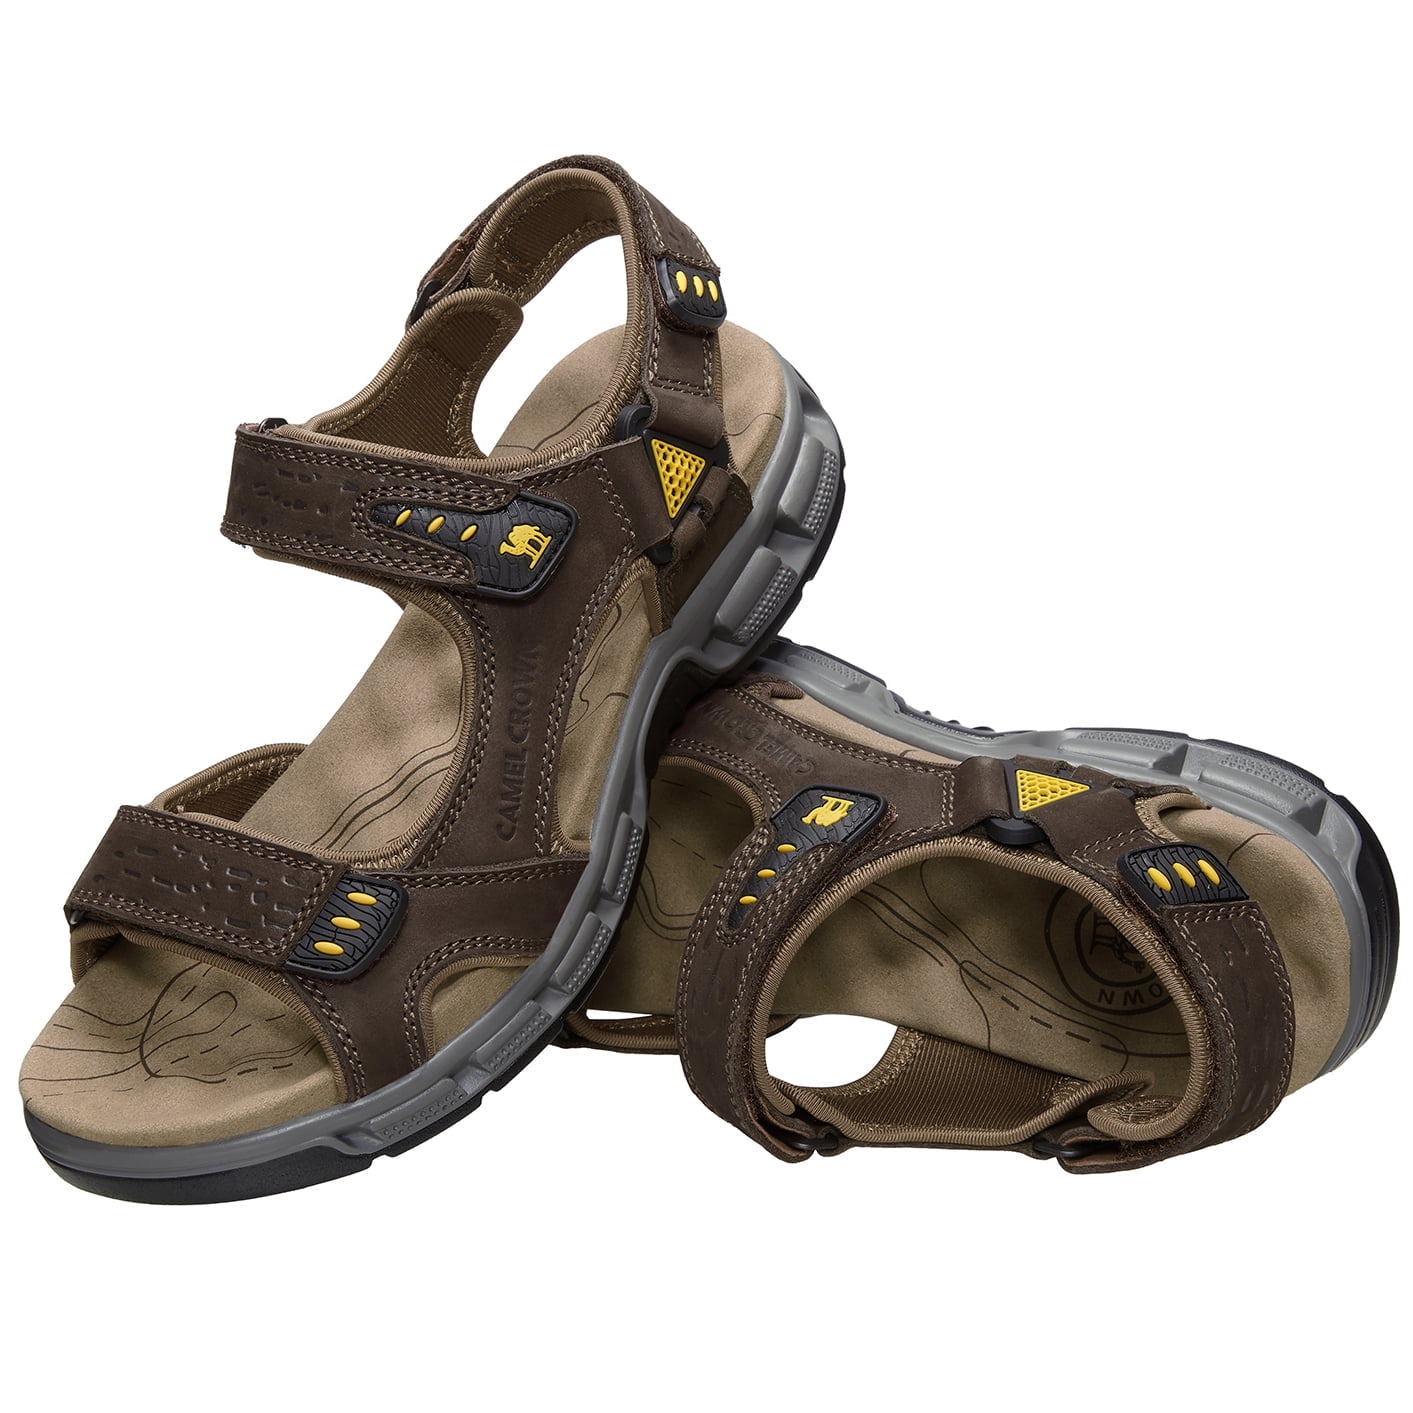 CAMEL CROWN Mens Leather Hiking Sandals Outdoor Beach Sports Male Water ...